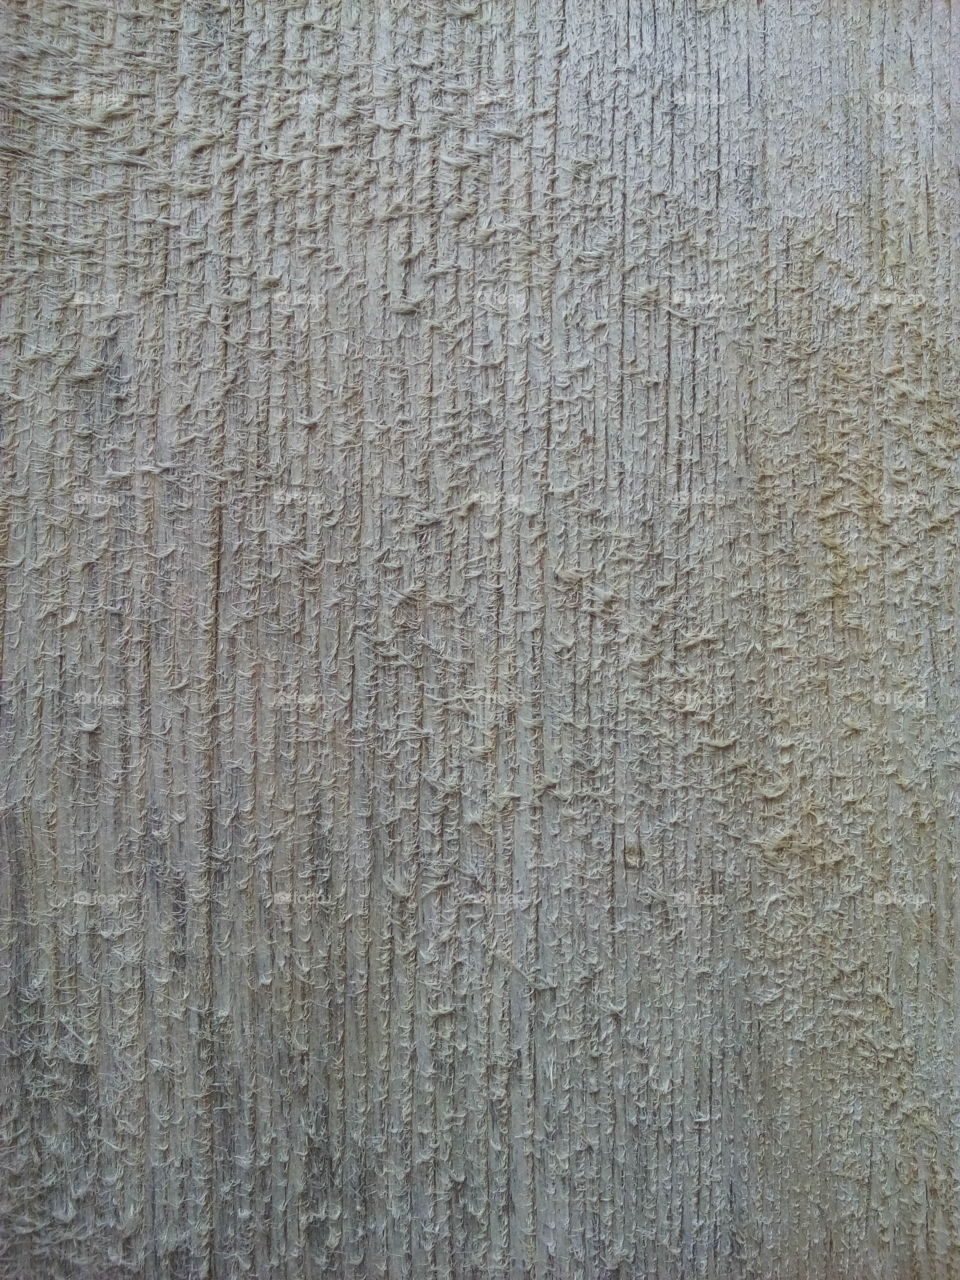 Tattered Wood Surface